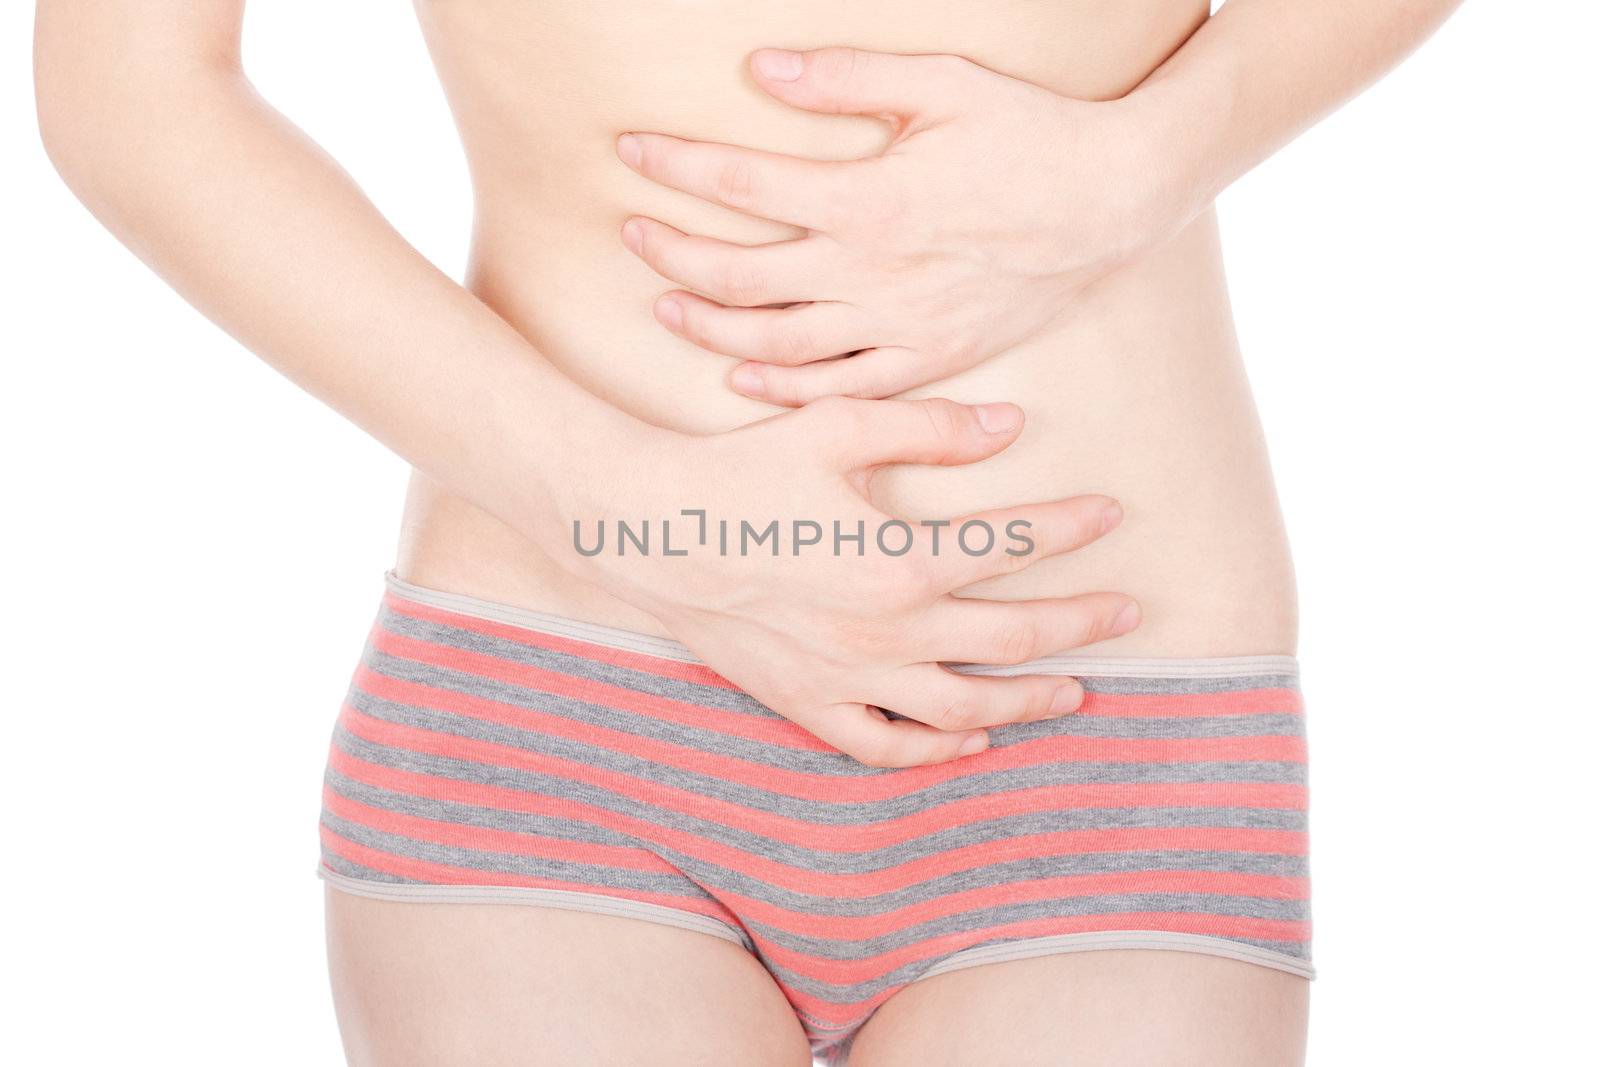 Girl pressing her stomach in pain, isolated on white background